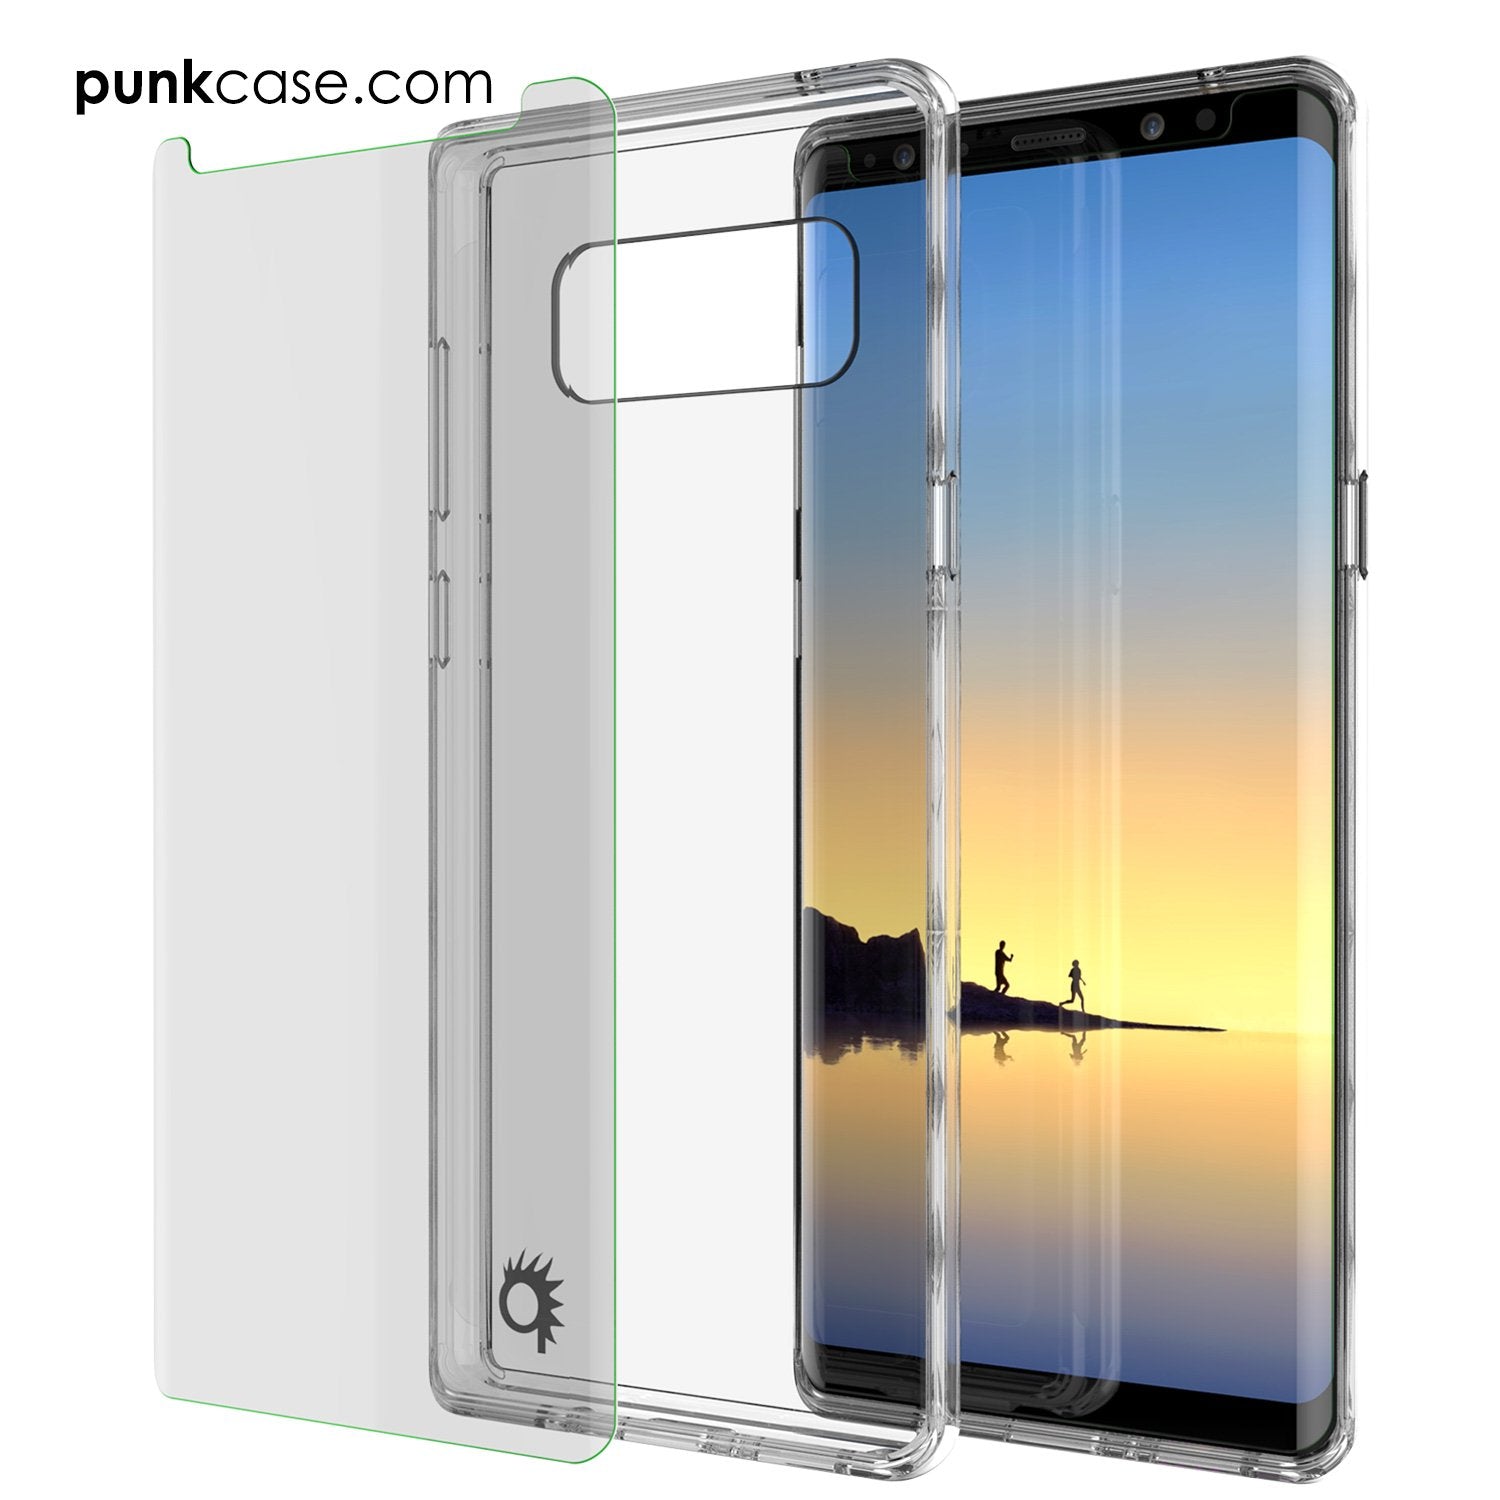 Galaxy Note 8 Case, PUNKcase [LUCID 2.0 Series] [Slim Fit] Armor Cover w/Integrated Anti-Shock System & PUNKSHIELD Screen Protector [Crystal Black]